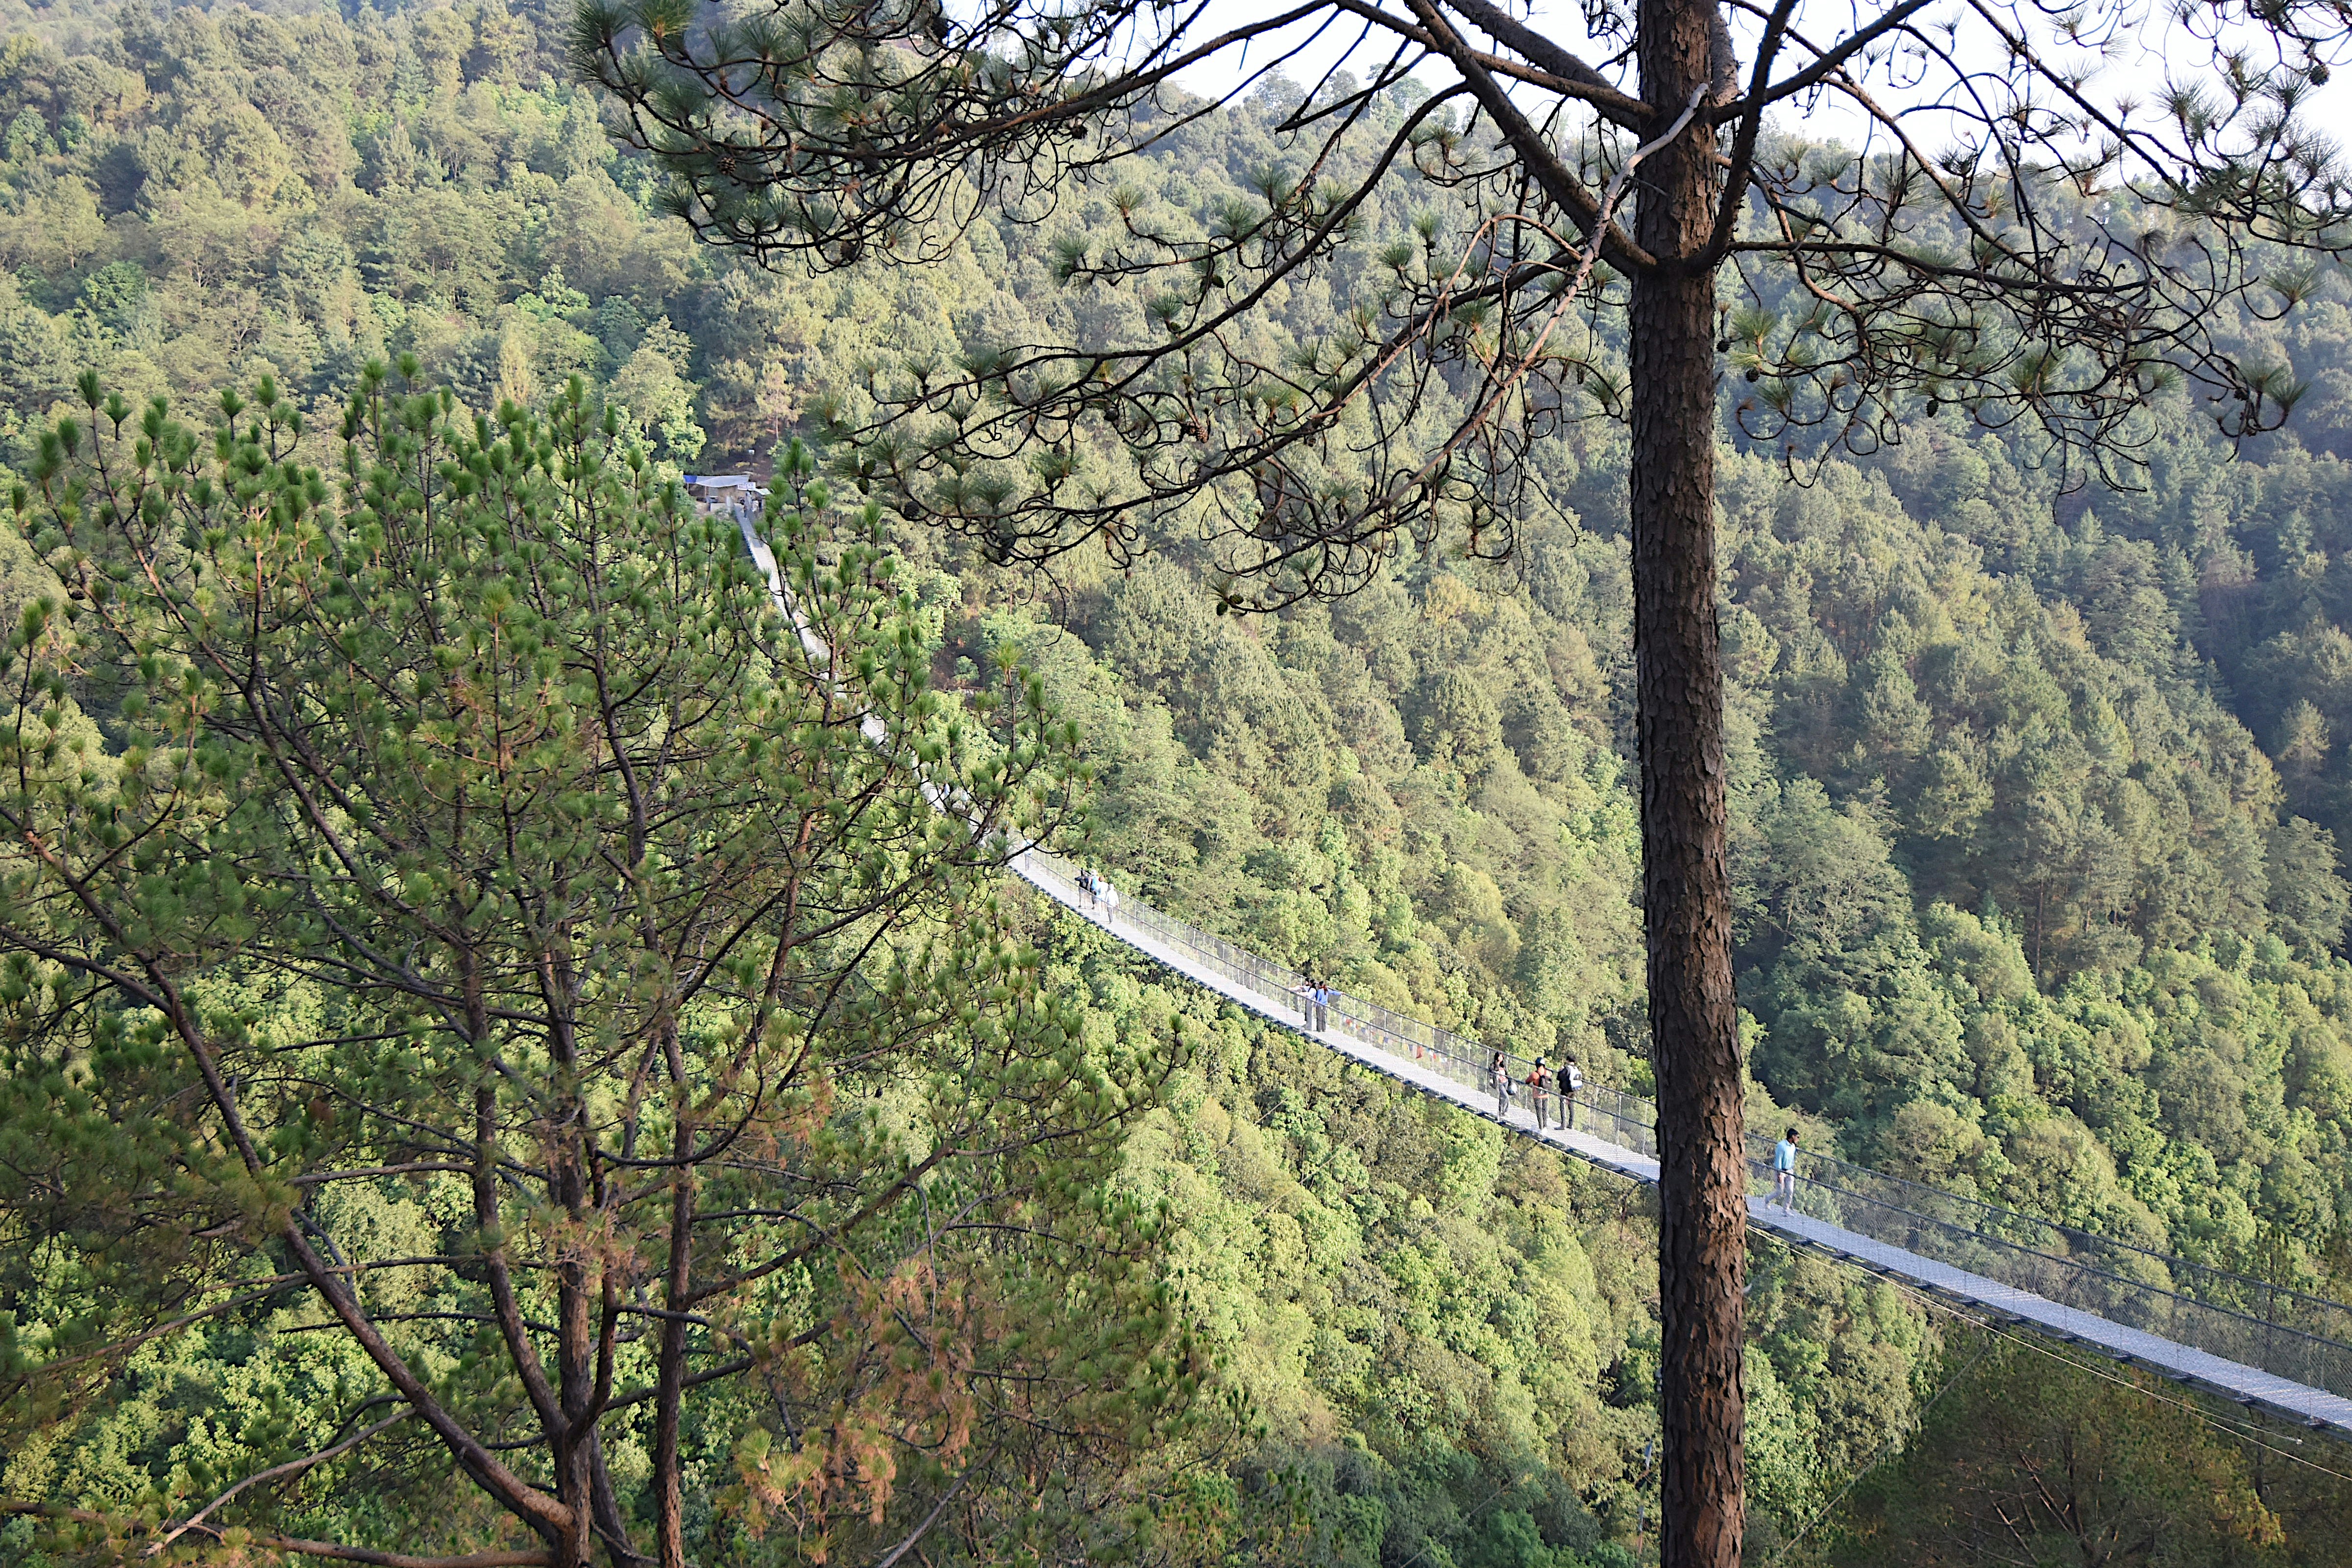 A long suspension bridge at a high level crossing above a forest